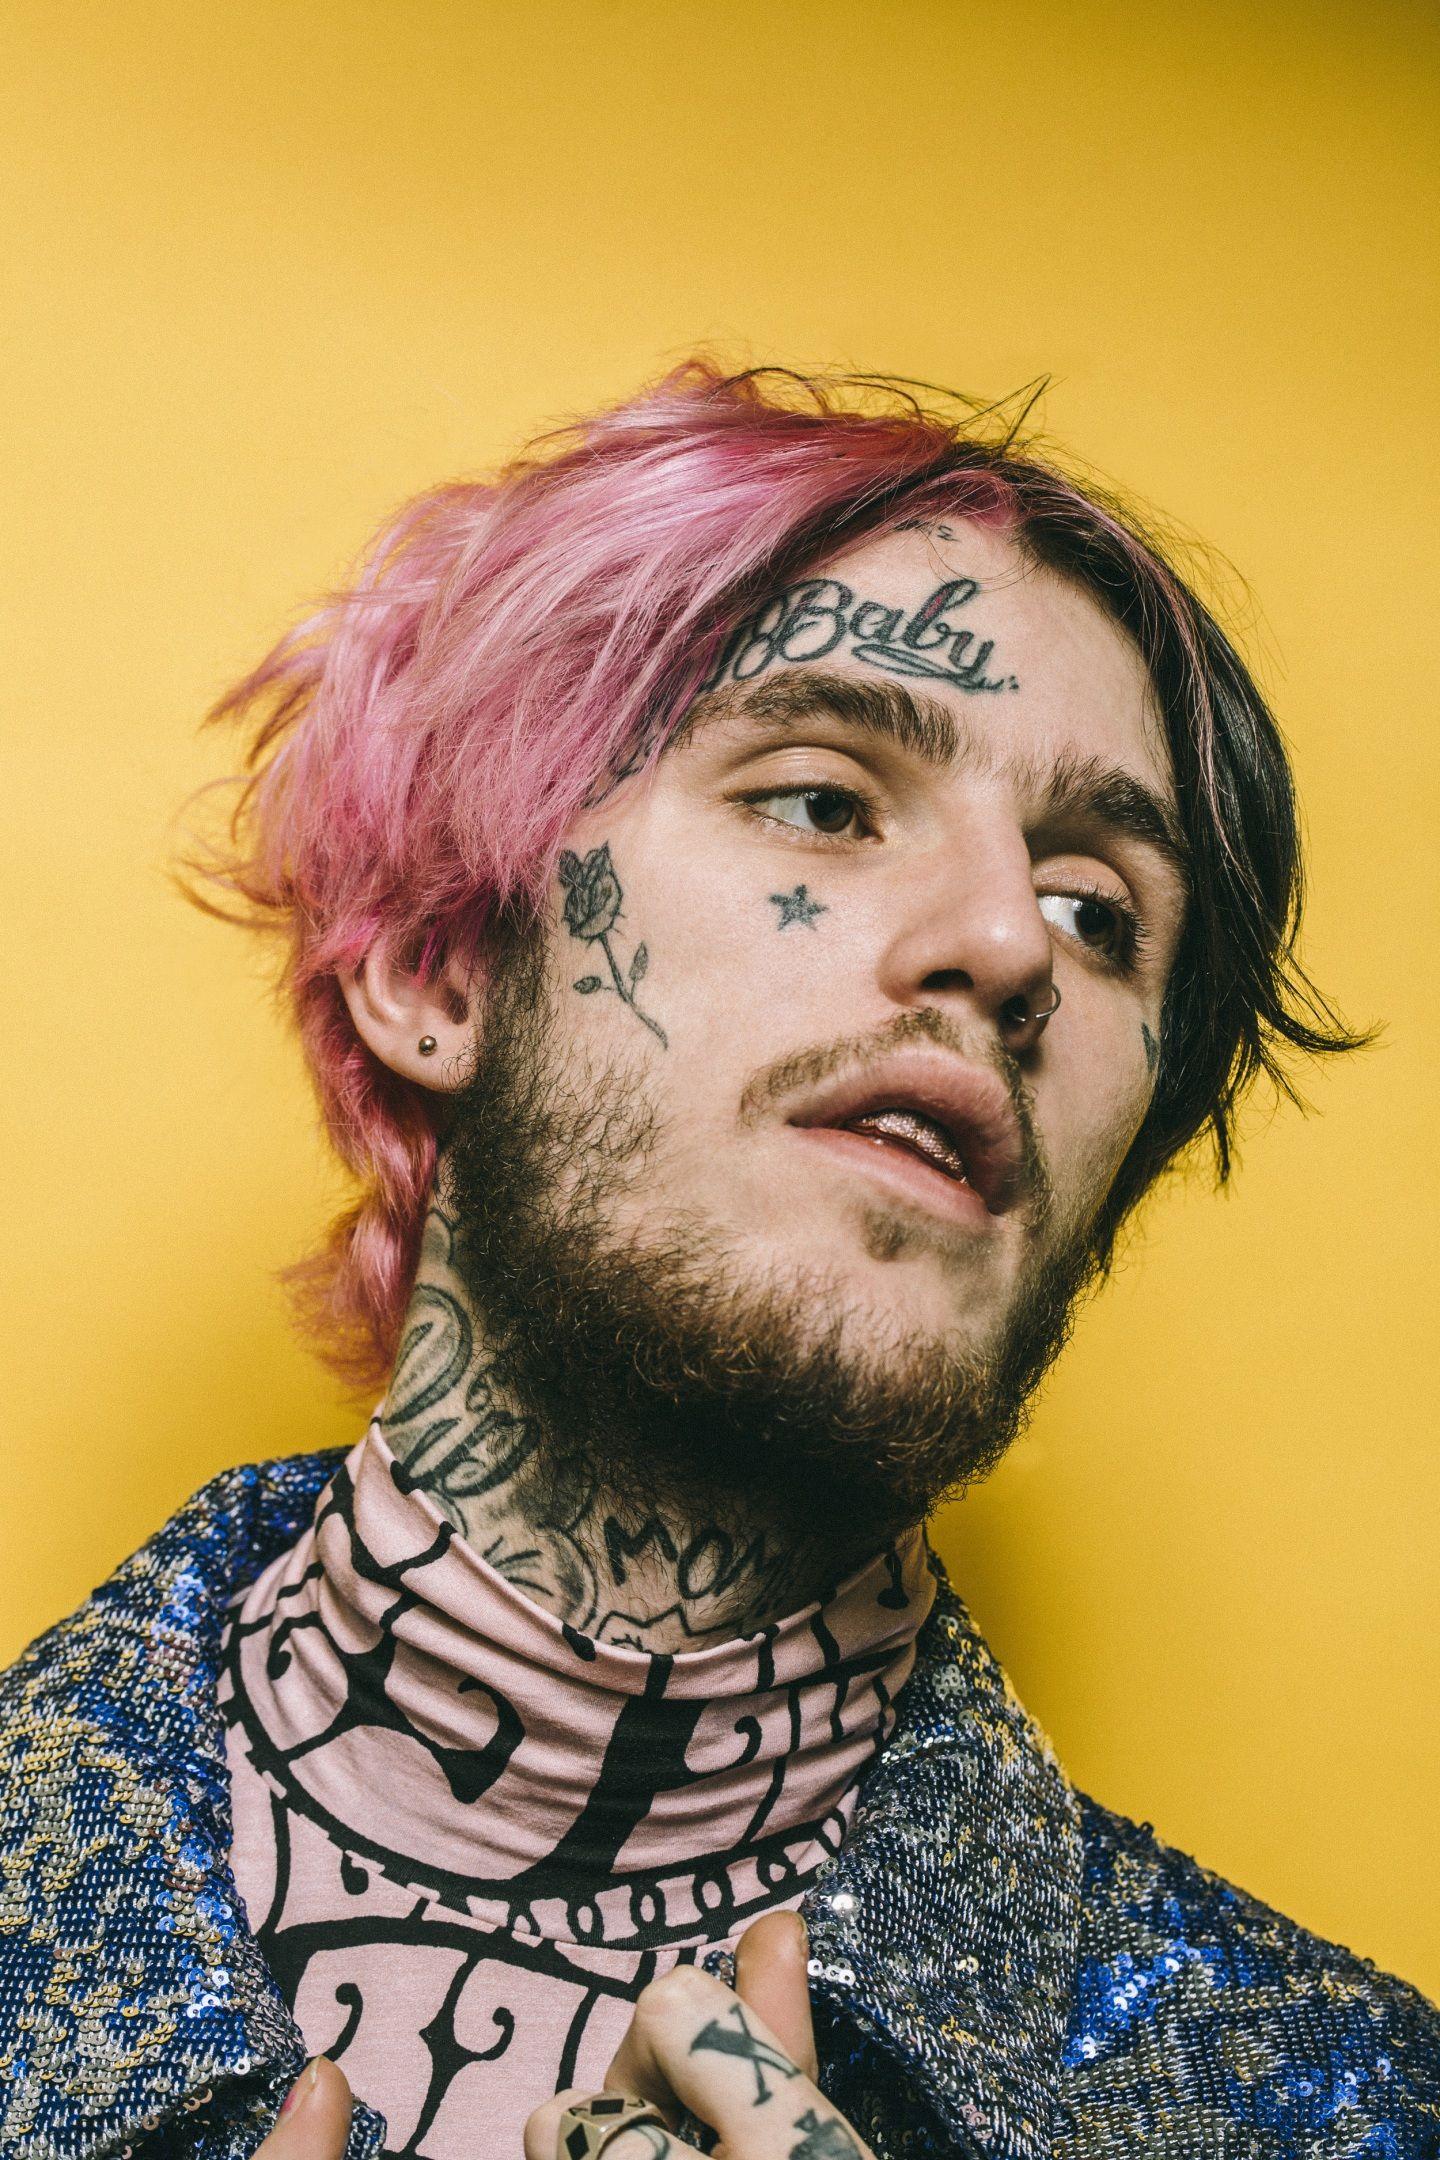 Meet Lil Peep, The All American Reject You'll Hate To Love. Peeps